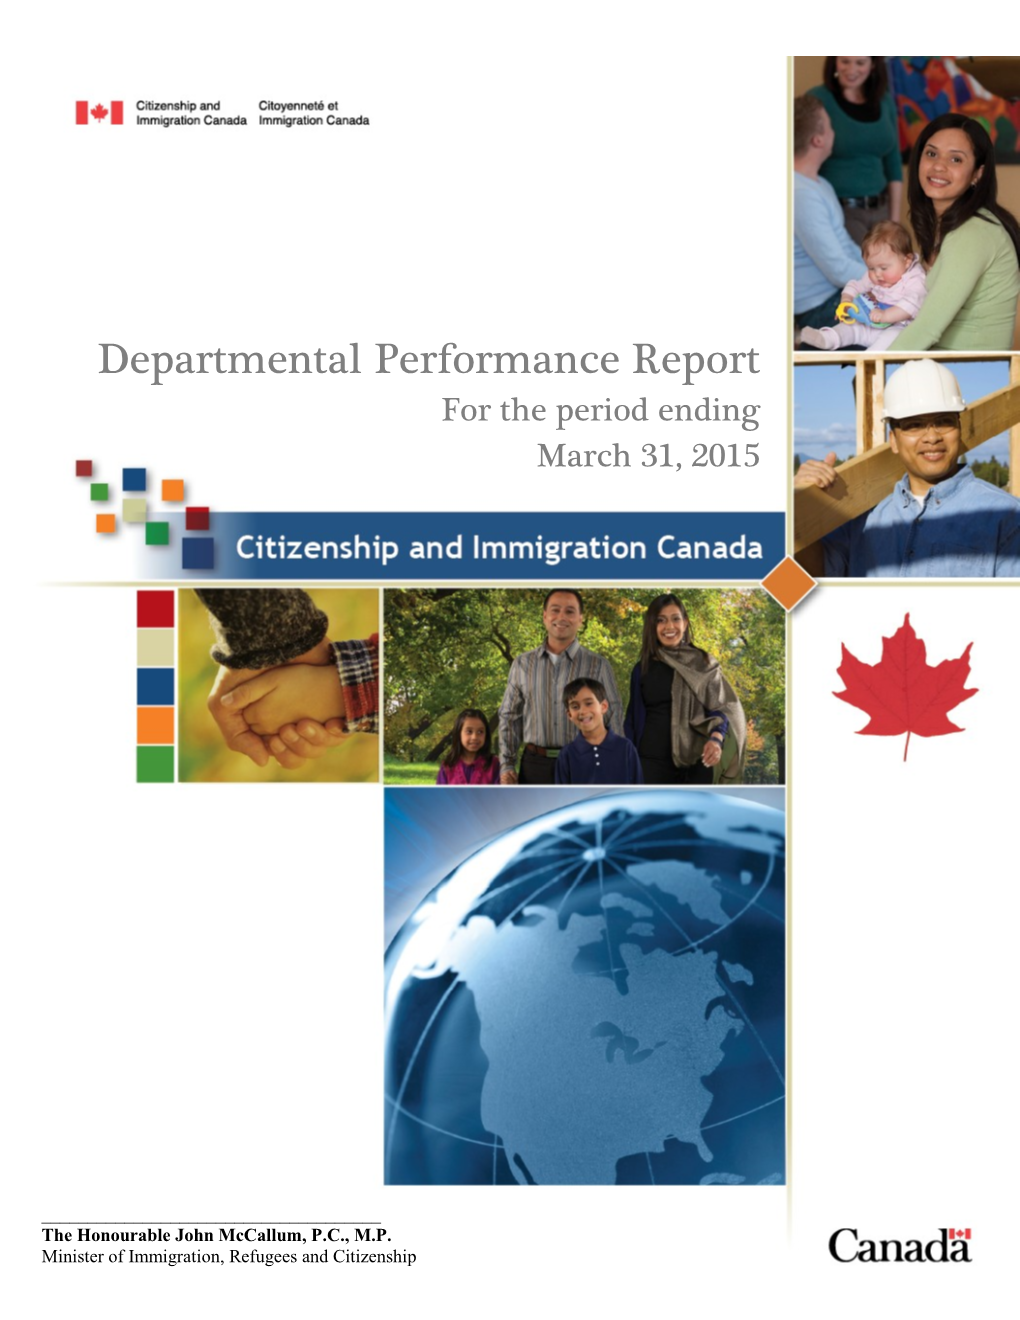 Departmental Performance Report for the Period Ending March 31, 2015